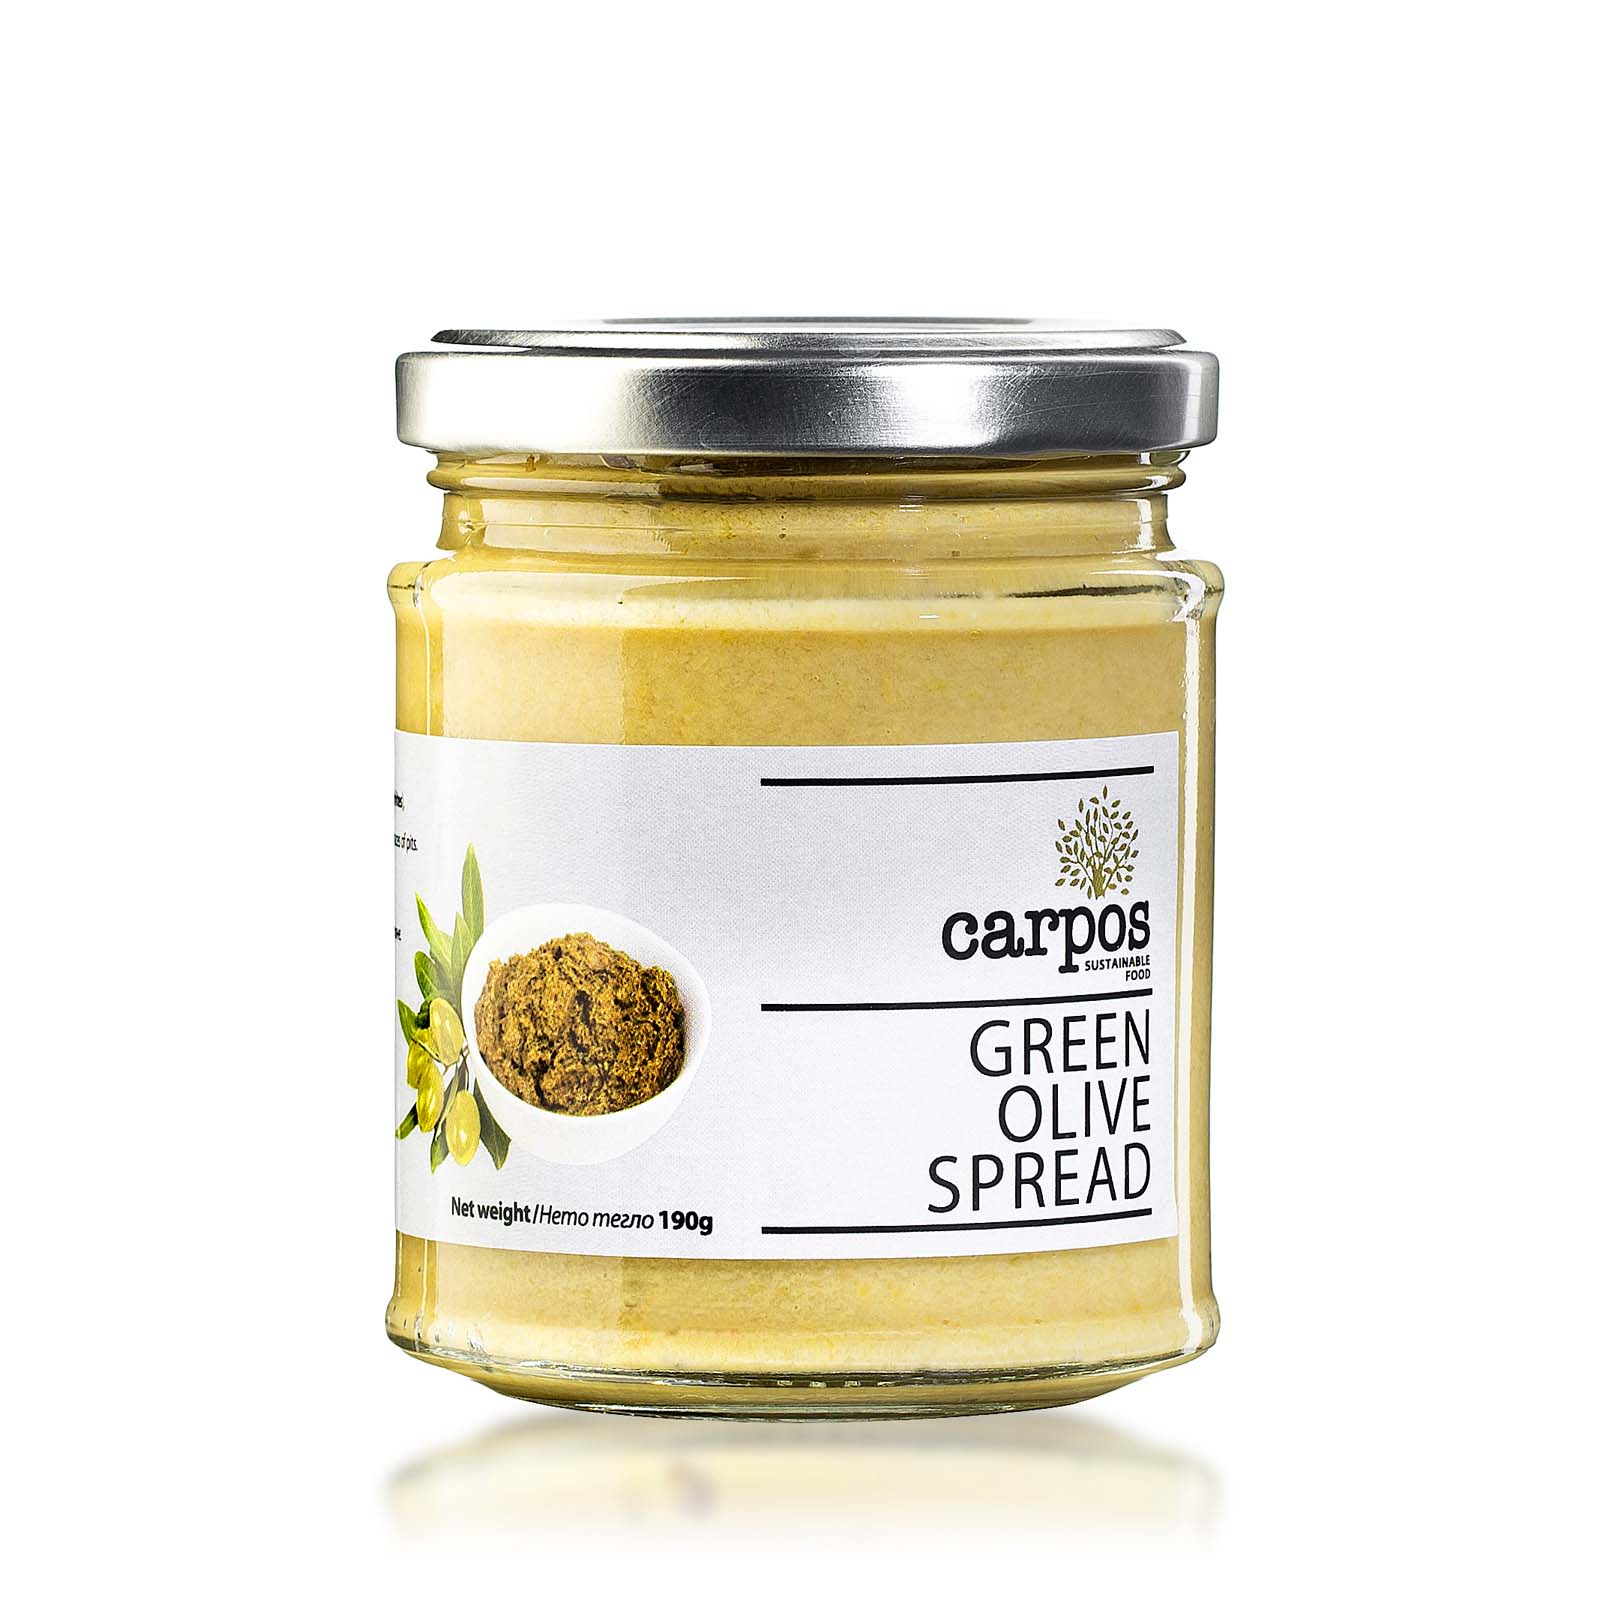 GREEN-OLIVE-SPREAD-190g